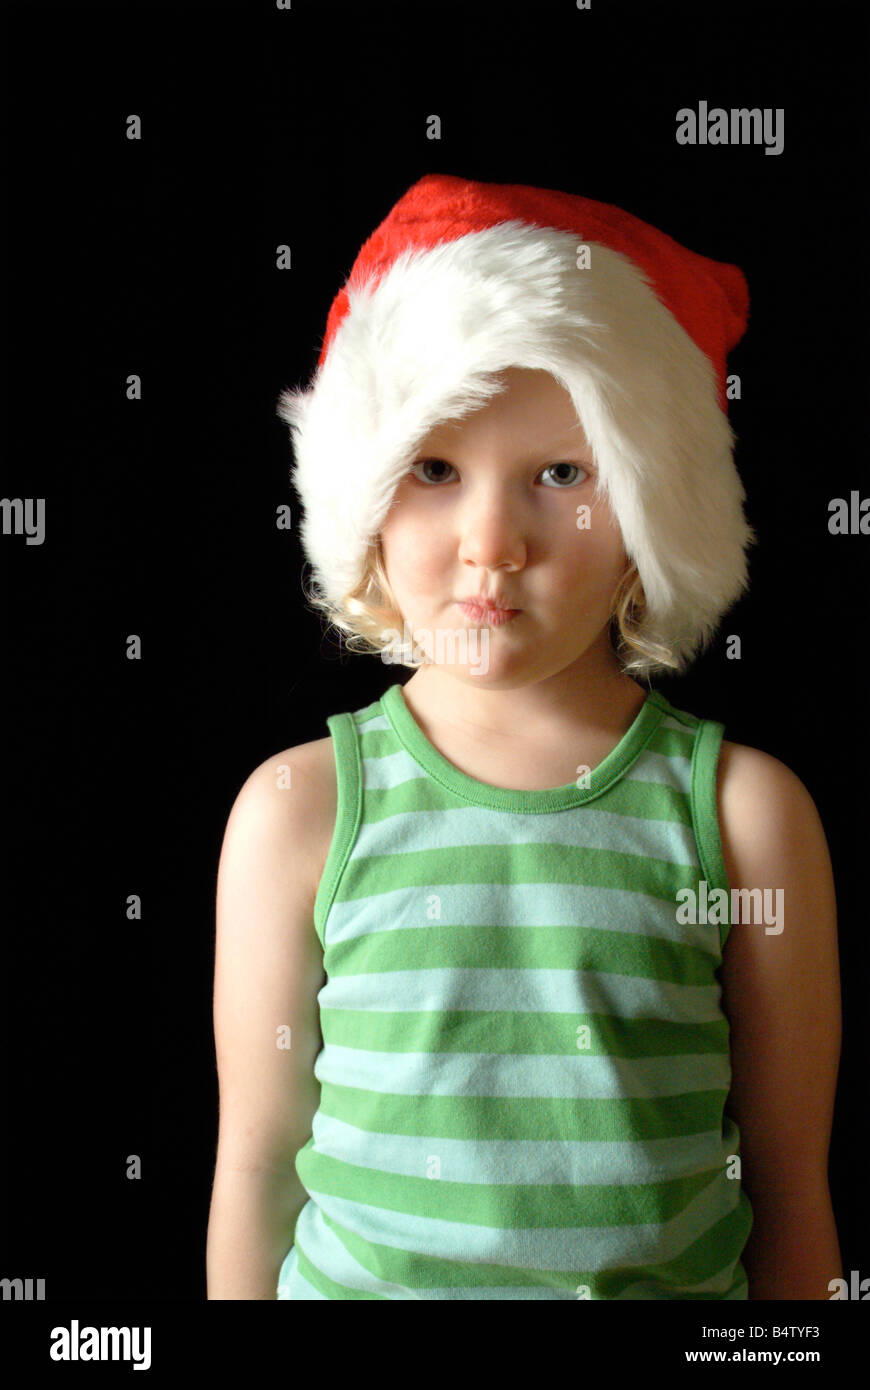 White girl wearing a red christmas hat and green stripy vest, looking apprehensive. Stock Photo